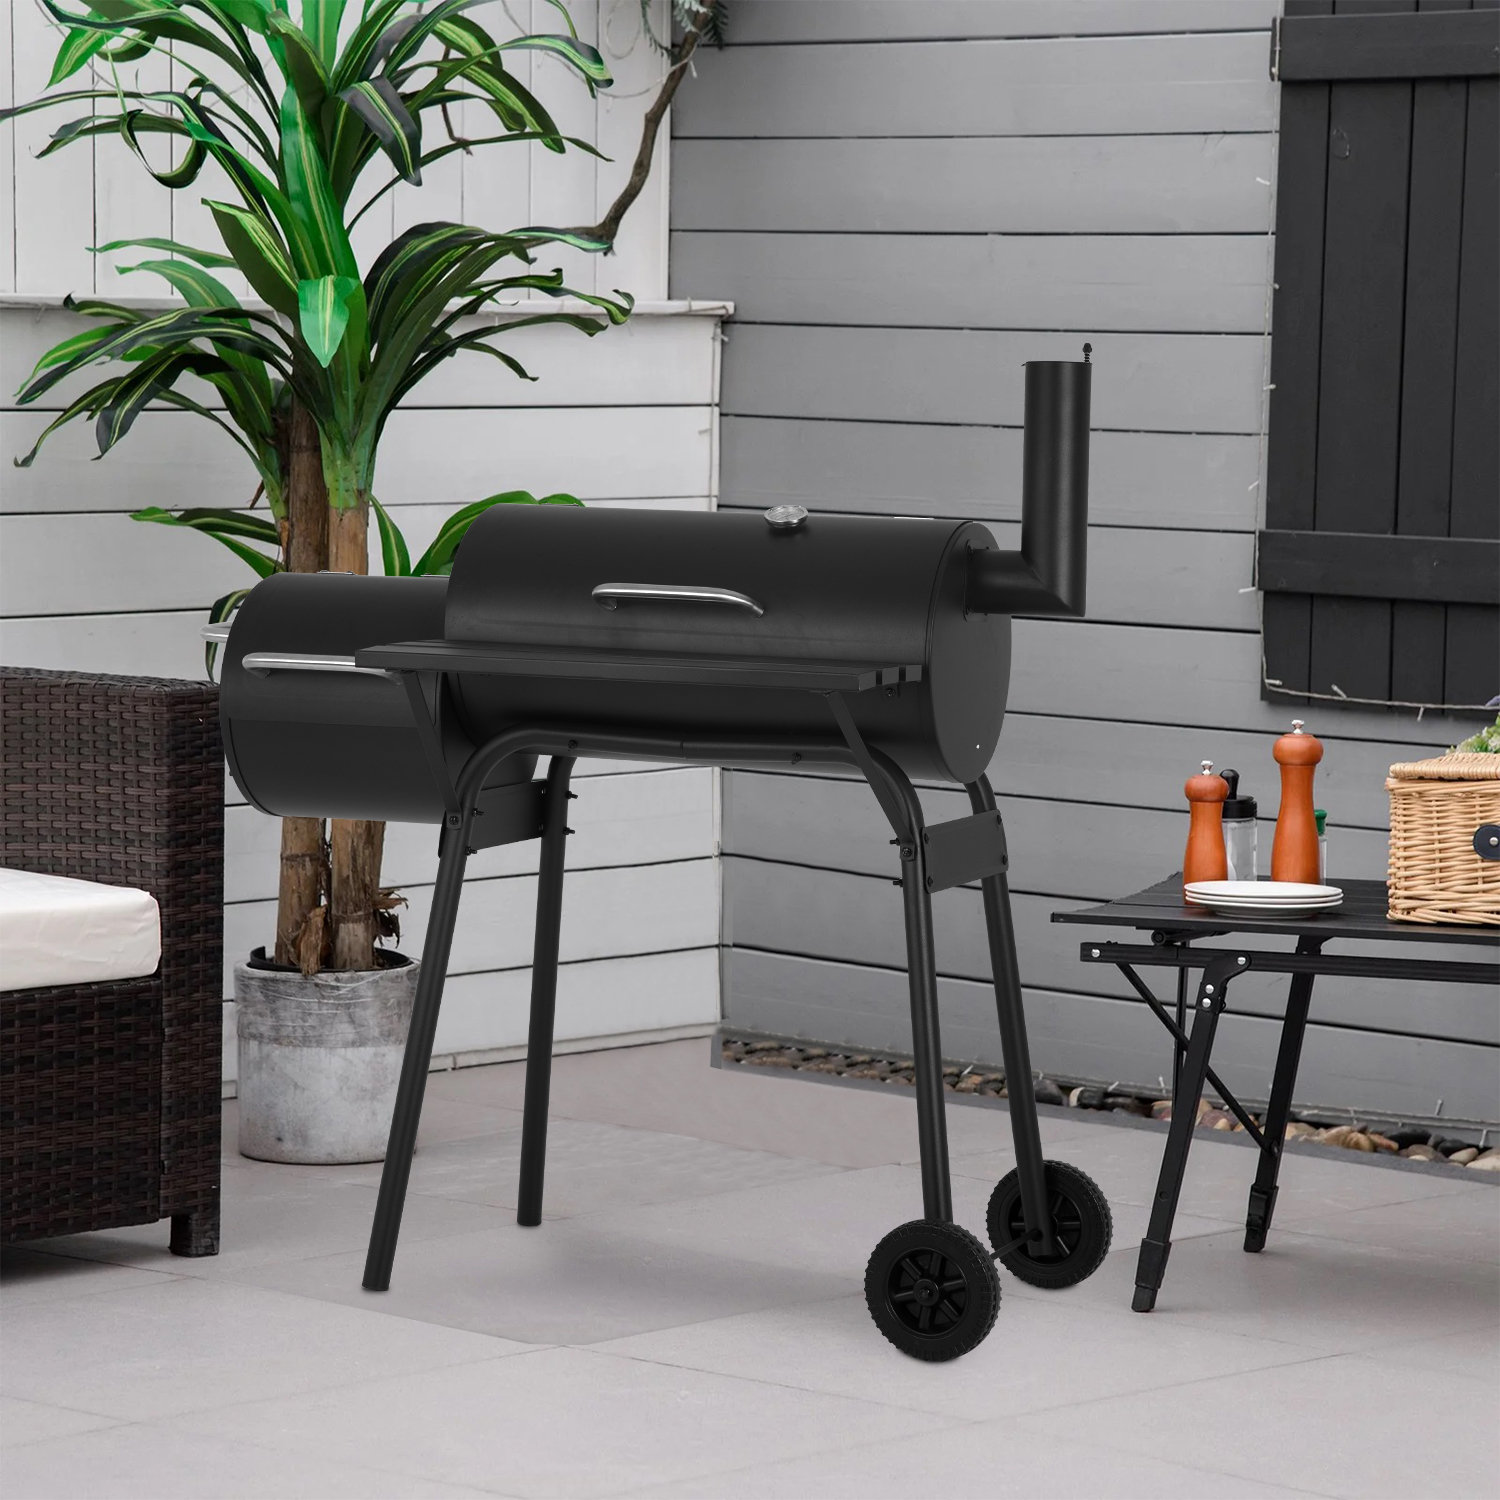 Under The Canopy D- Charcoal, Charcoal / Set with Small Bath Rug Set with Small Bath Rug Charcoal